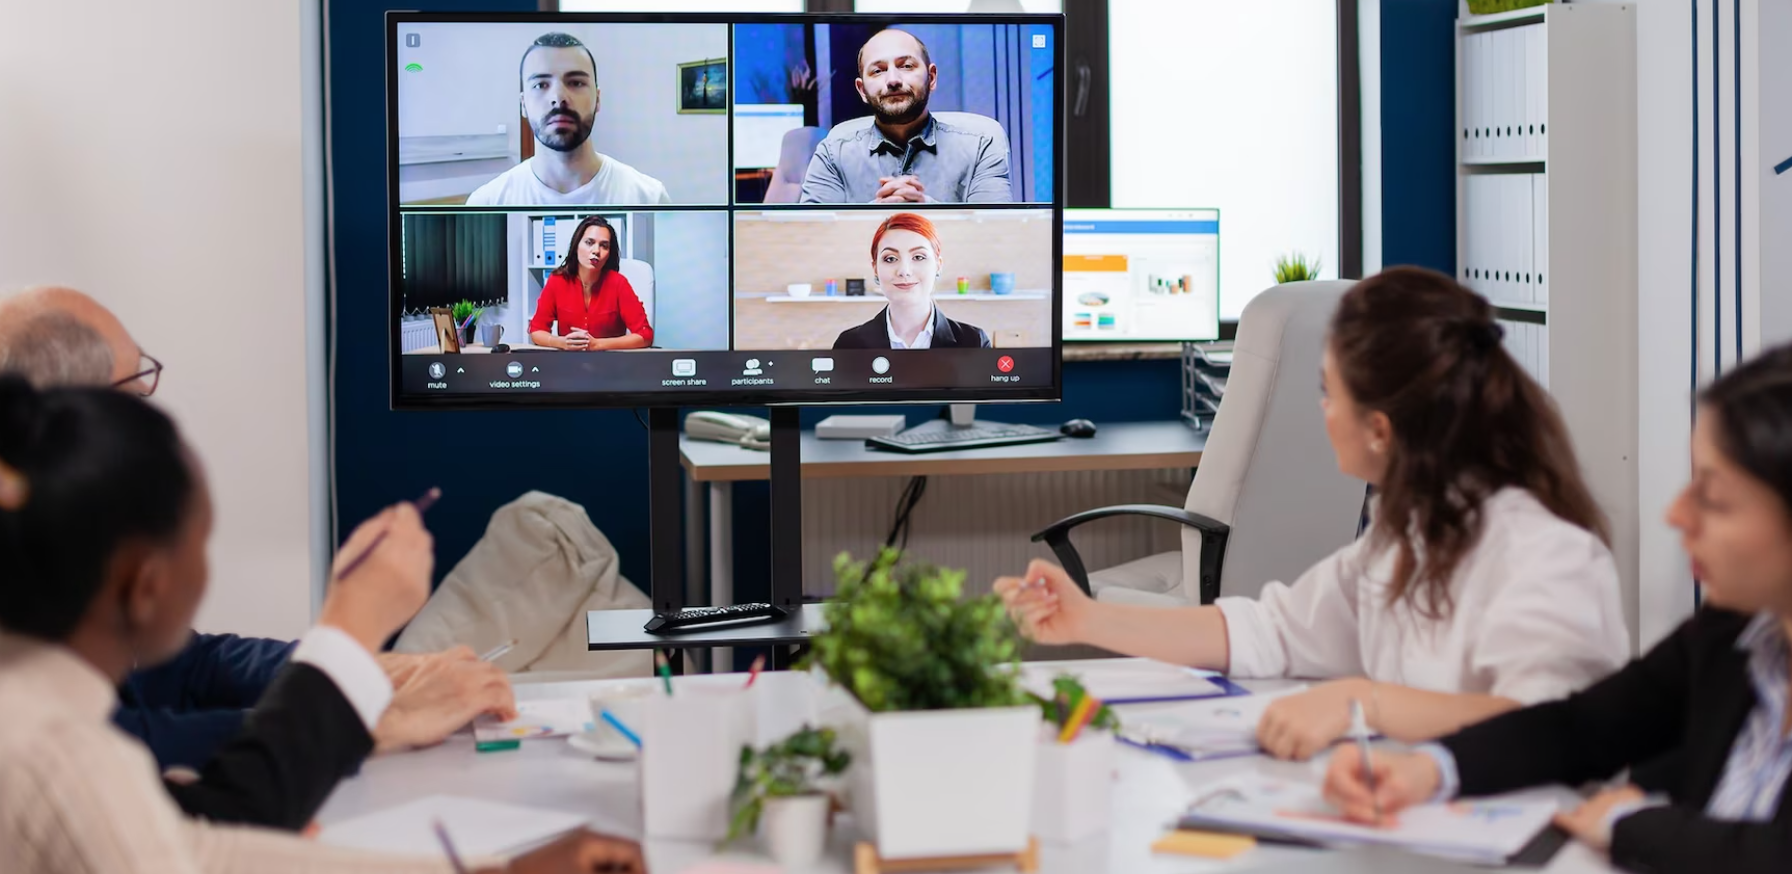 Building Cohesion and Trust in Remote Teams